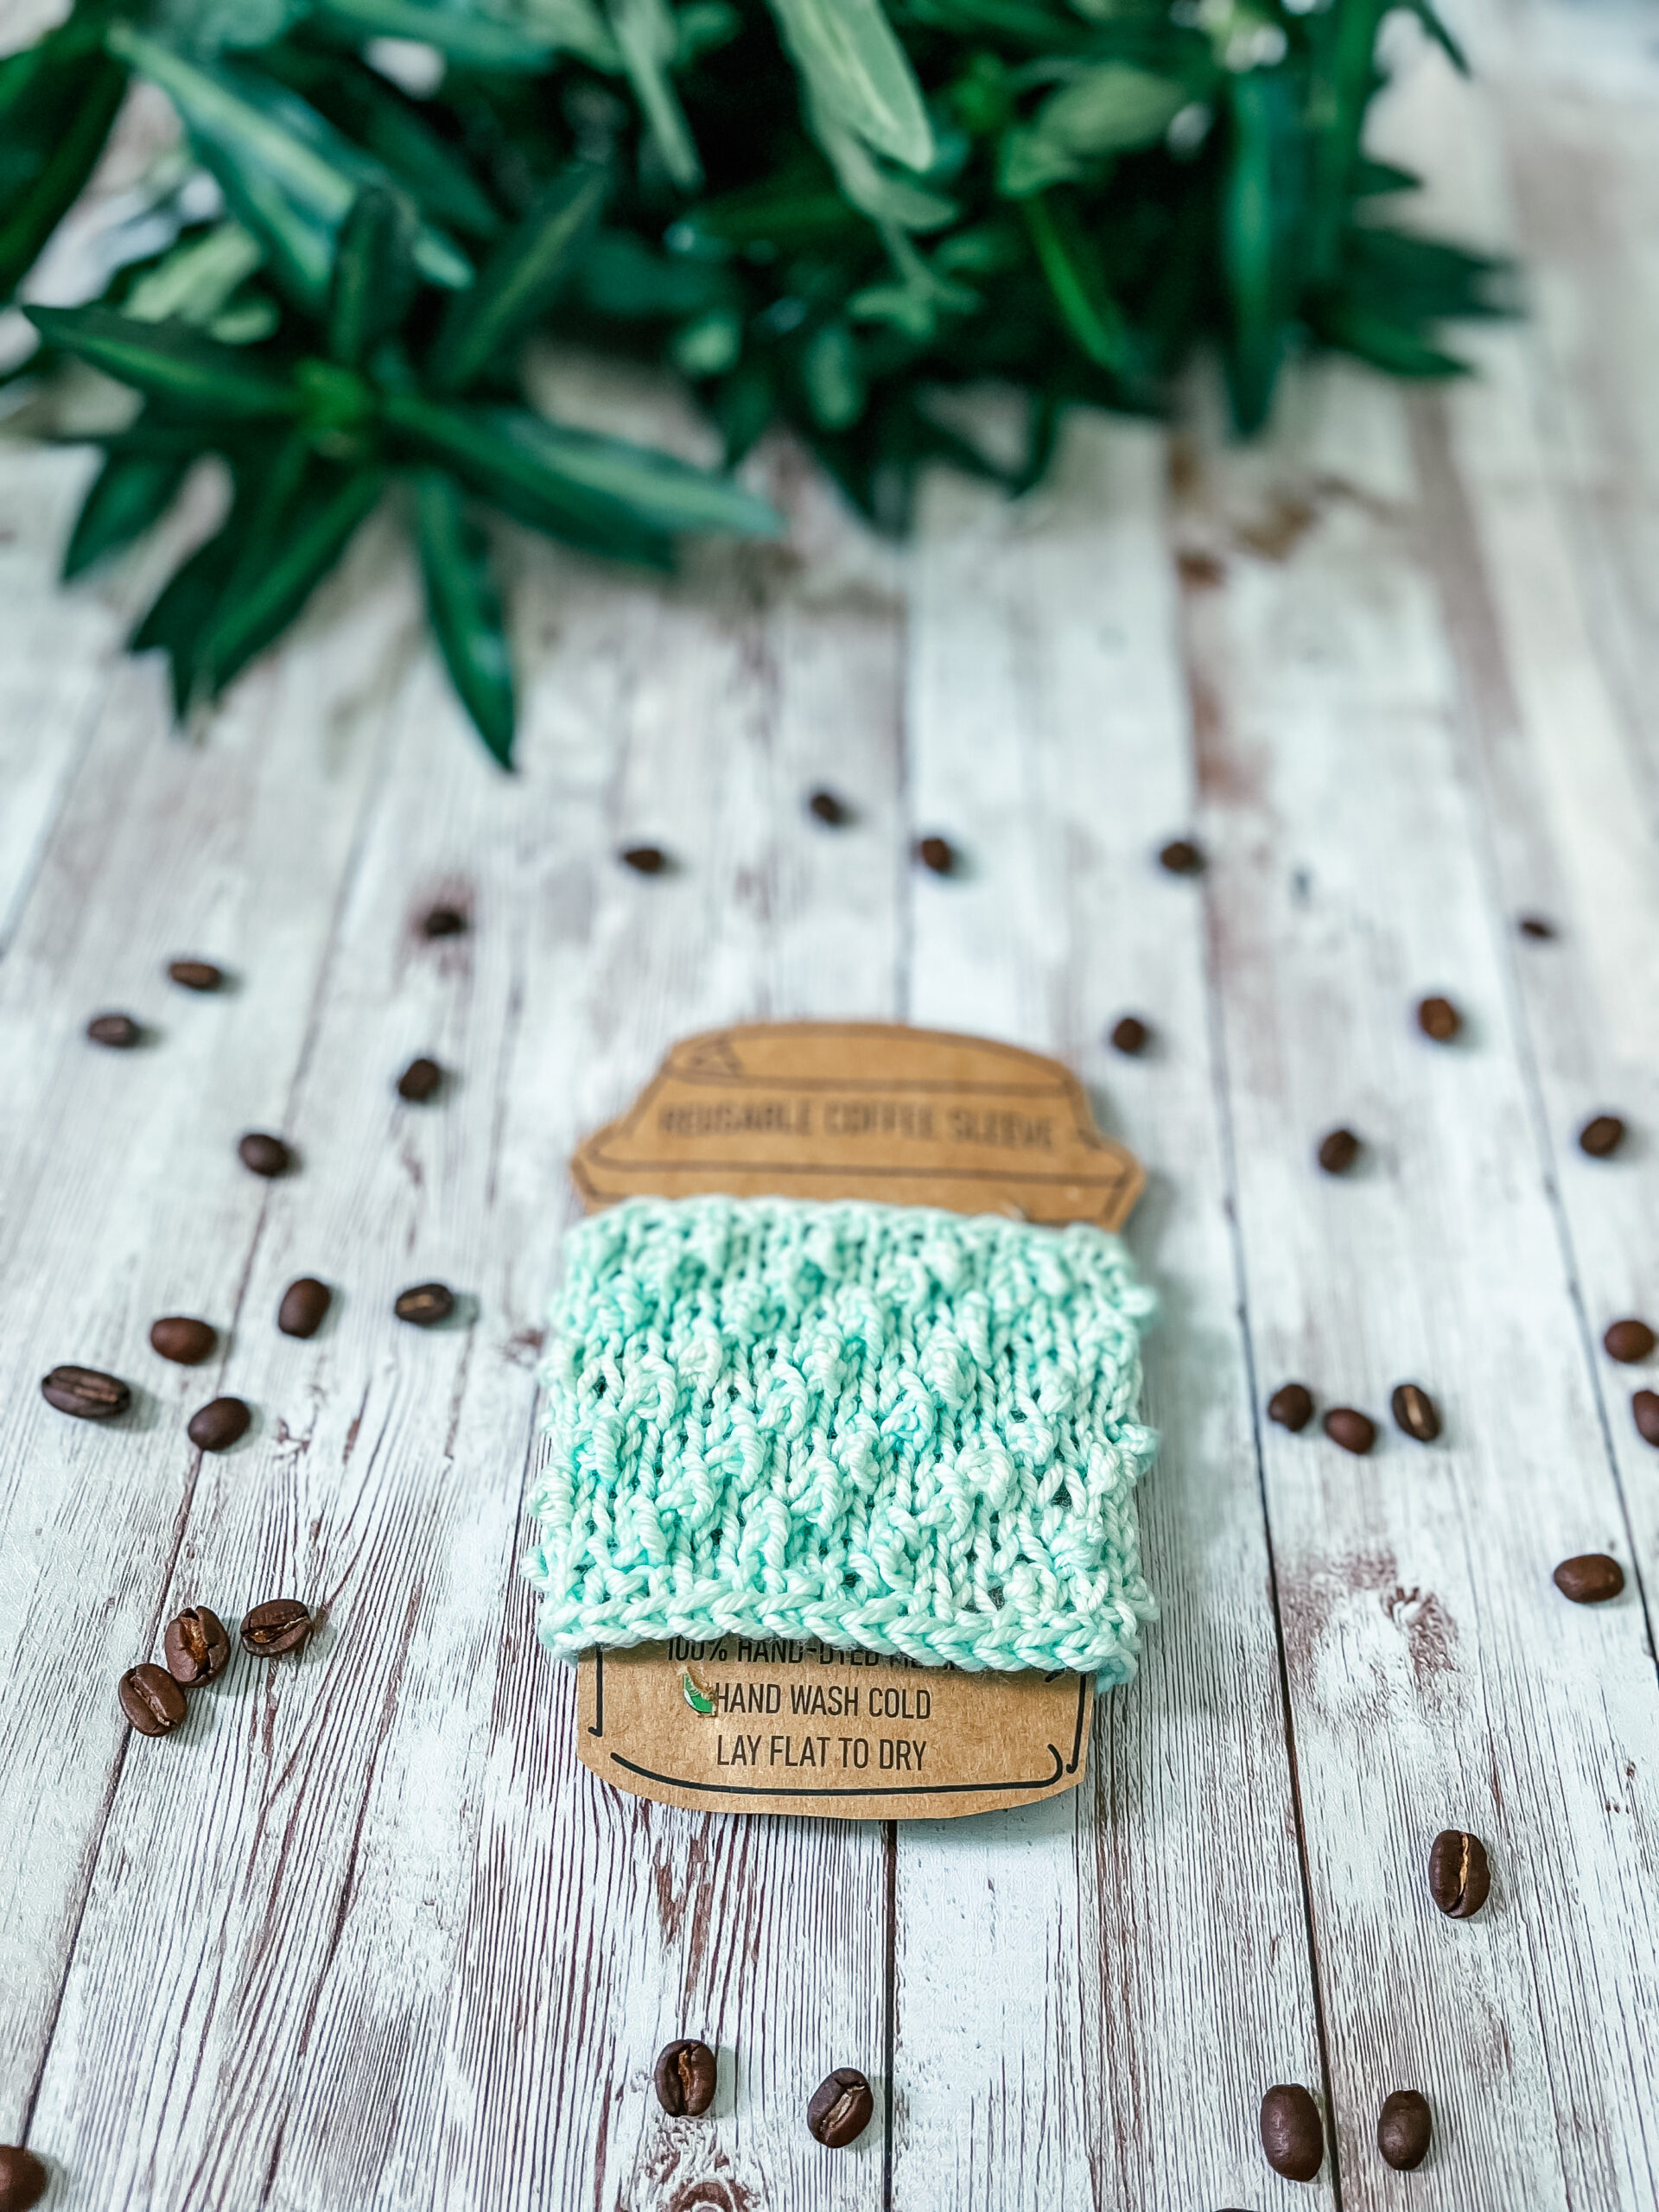 A light green coffee sleeve is wrapped around a kraft paper image of a coffee cup. It rests on a wood plank, surrounded by scattered coffee beans and greenery in the background